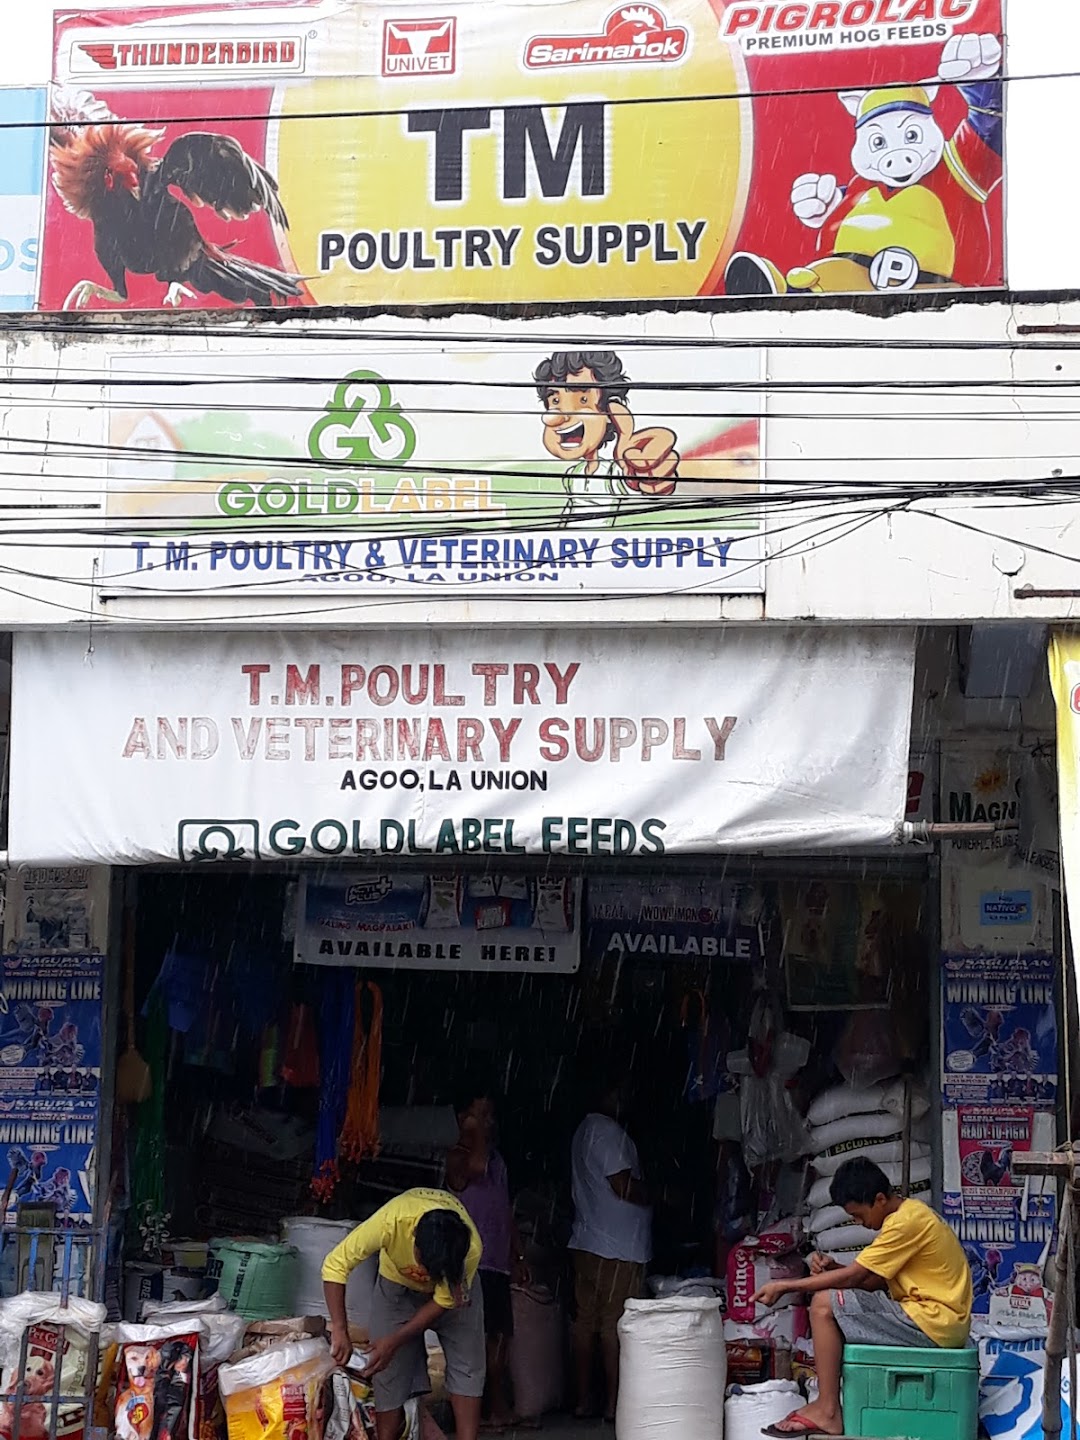 T.M POULTRY & VETERINARY SUPPLY